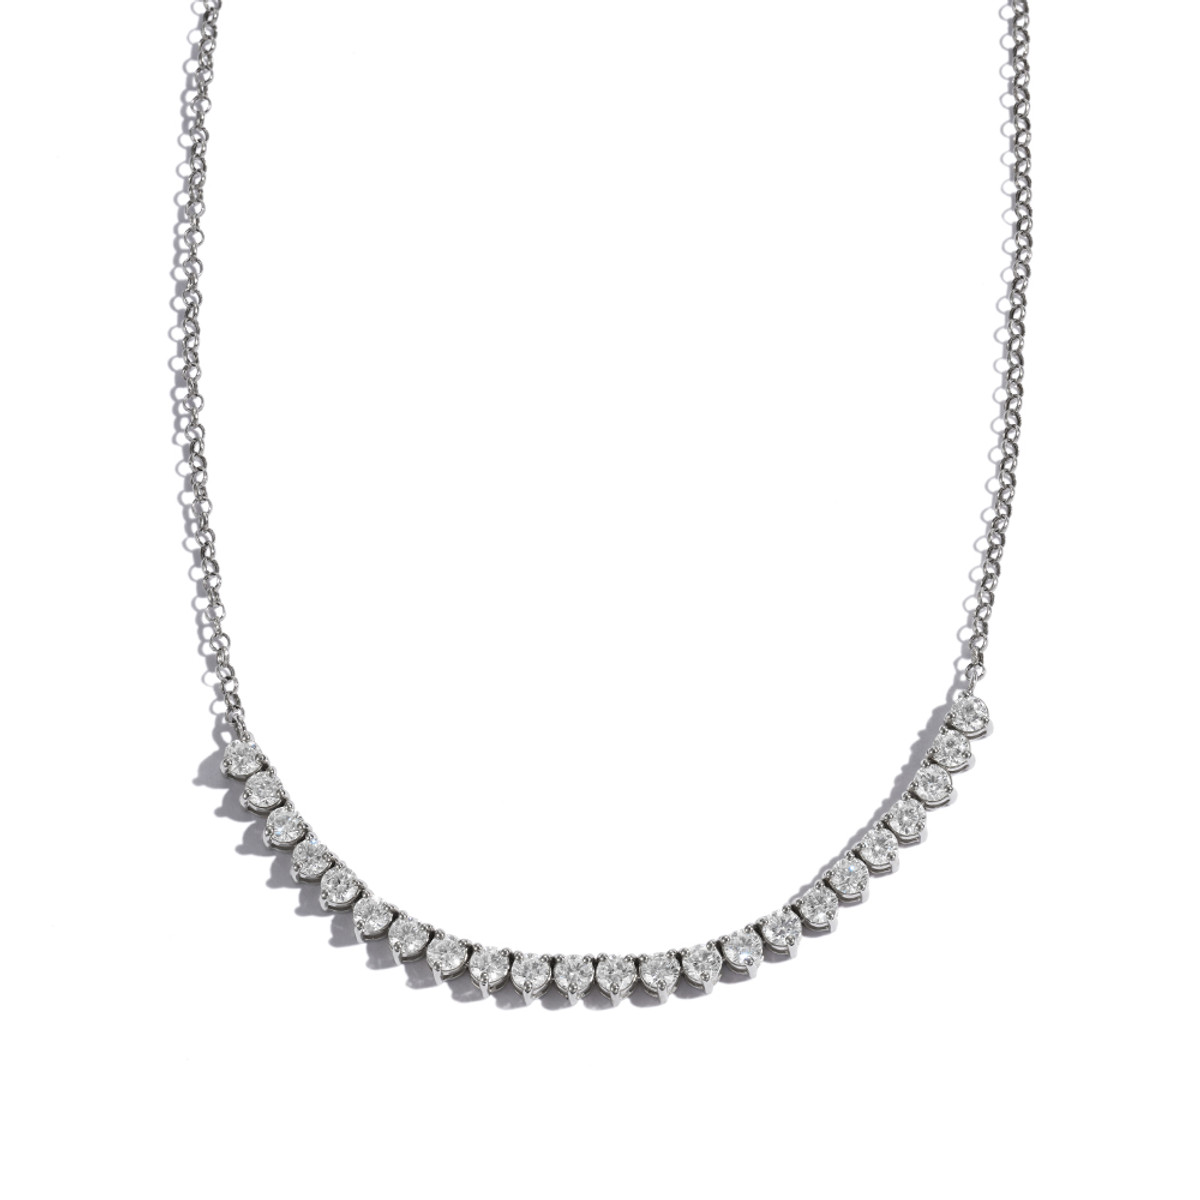 Hyde Park 18k White Gold 23-Round Floating 2.79ct Diamond Necklace-44018